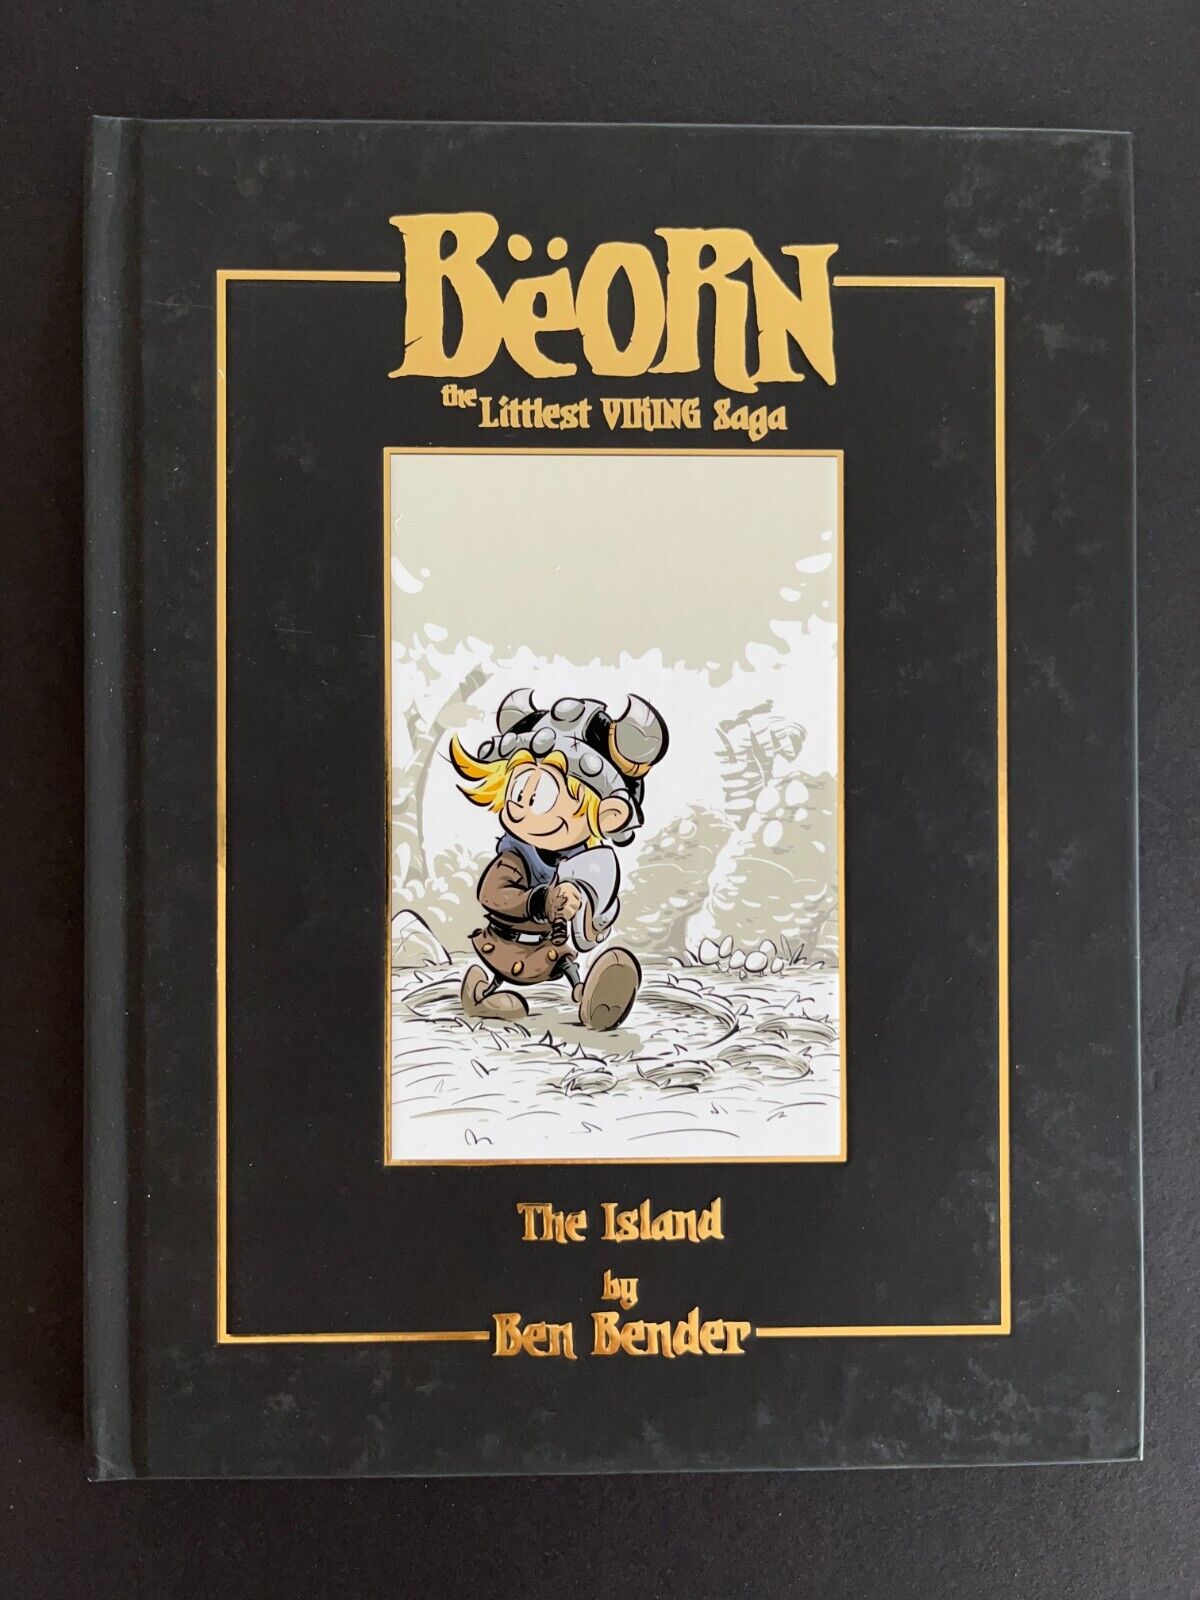 Beorn: The Littlest Viking Saga, The Island (2020, Hardcover, Signed & Numbered)